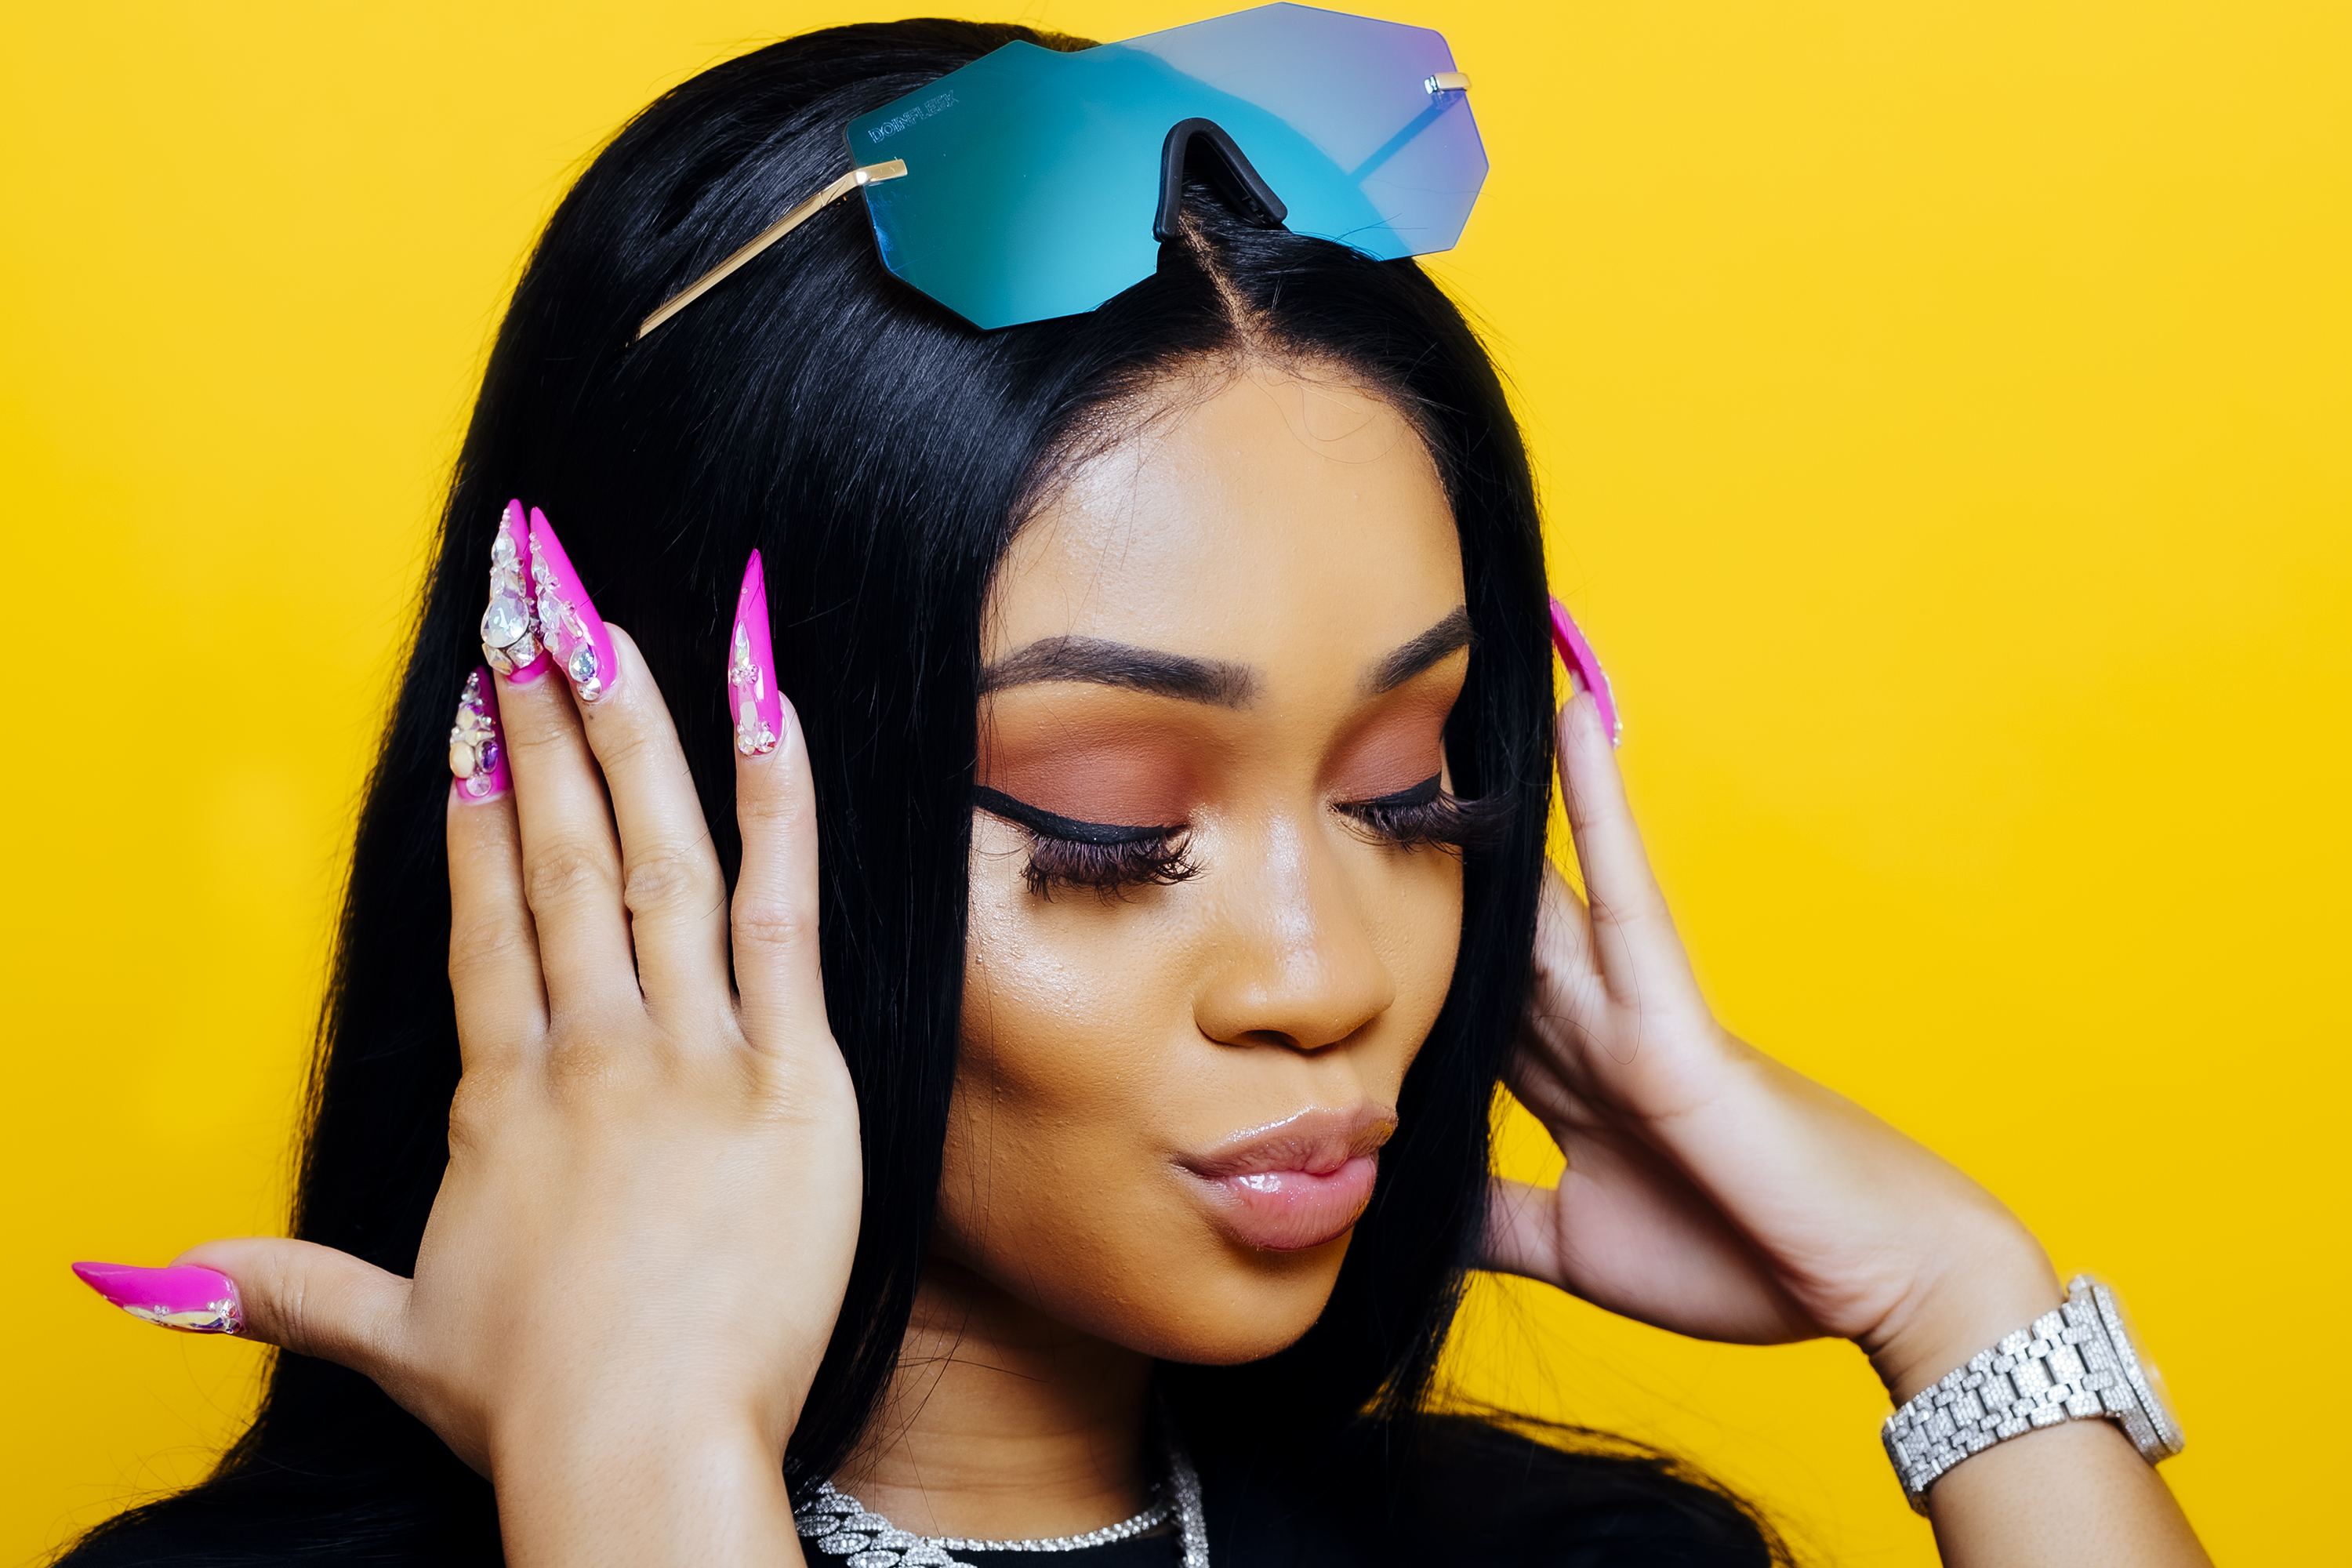 Saweetie is the big-dreams bad girl poised to destroy the rap game